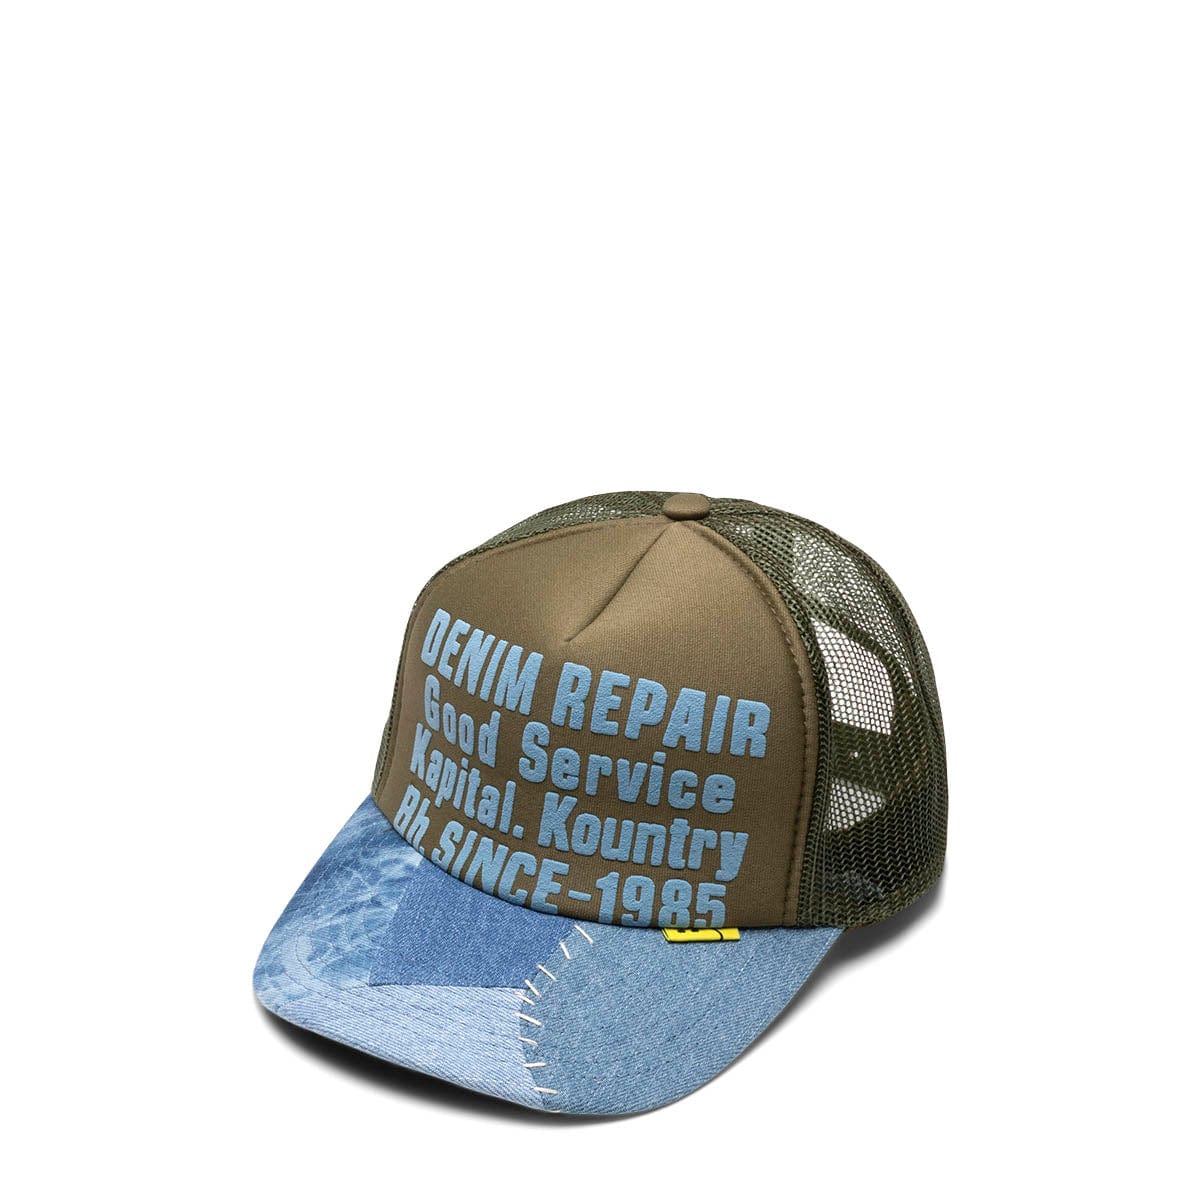 Distressed Denim Trucker Cap with Upcycled Patch – Haute Suburban